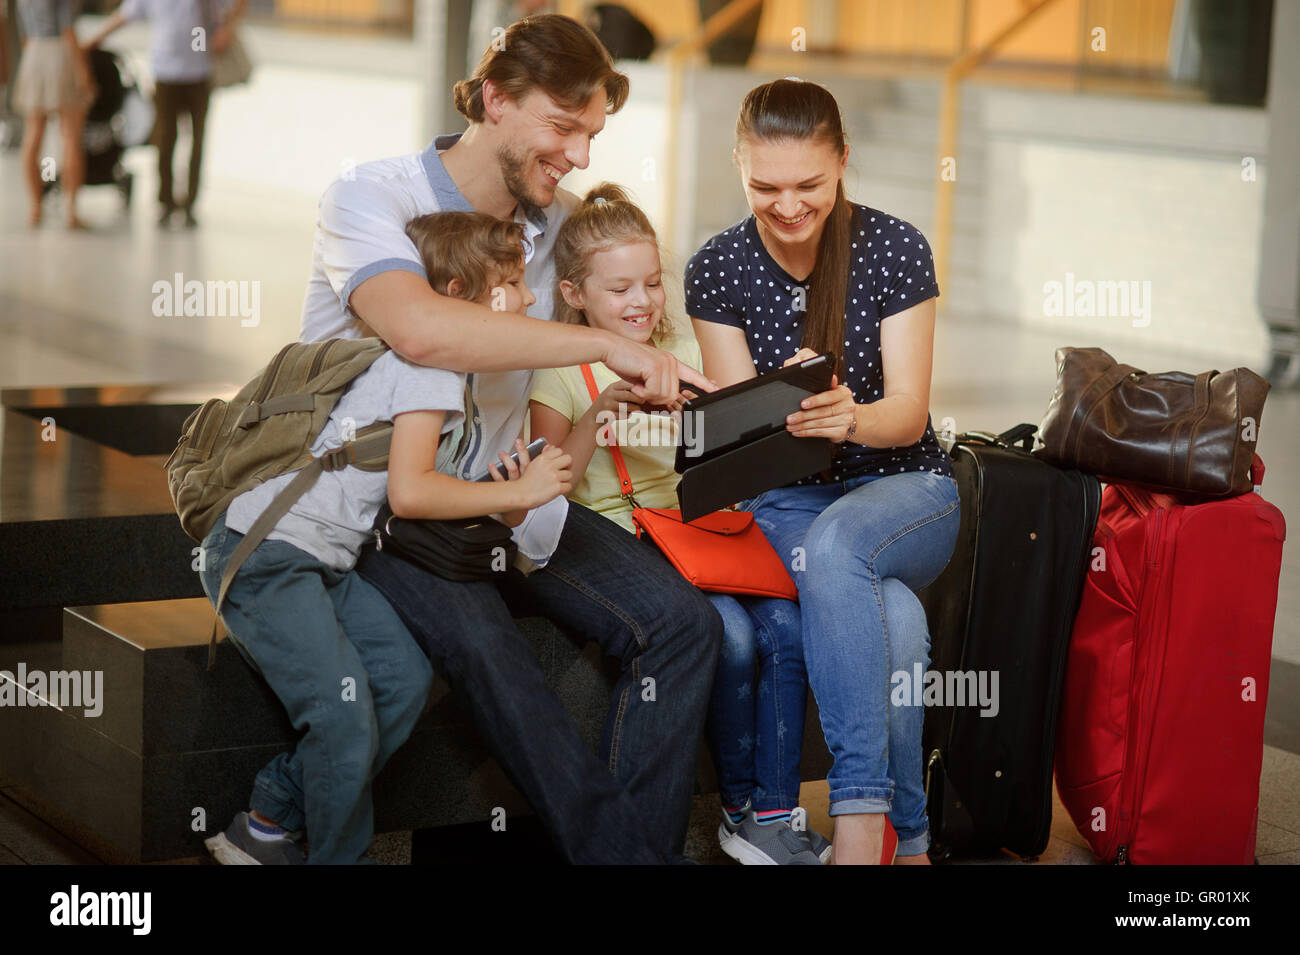 Parents with two children at the railway station. Family in large waiting room. All have settled down on bench. Mom shows someth Stock Photo